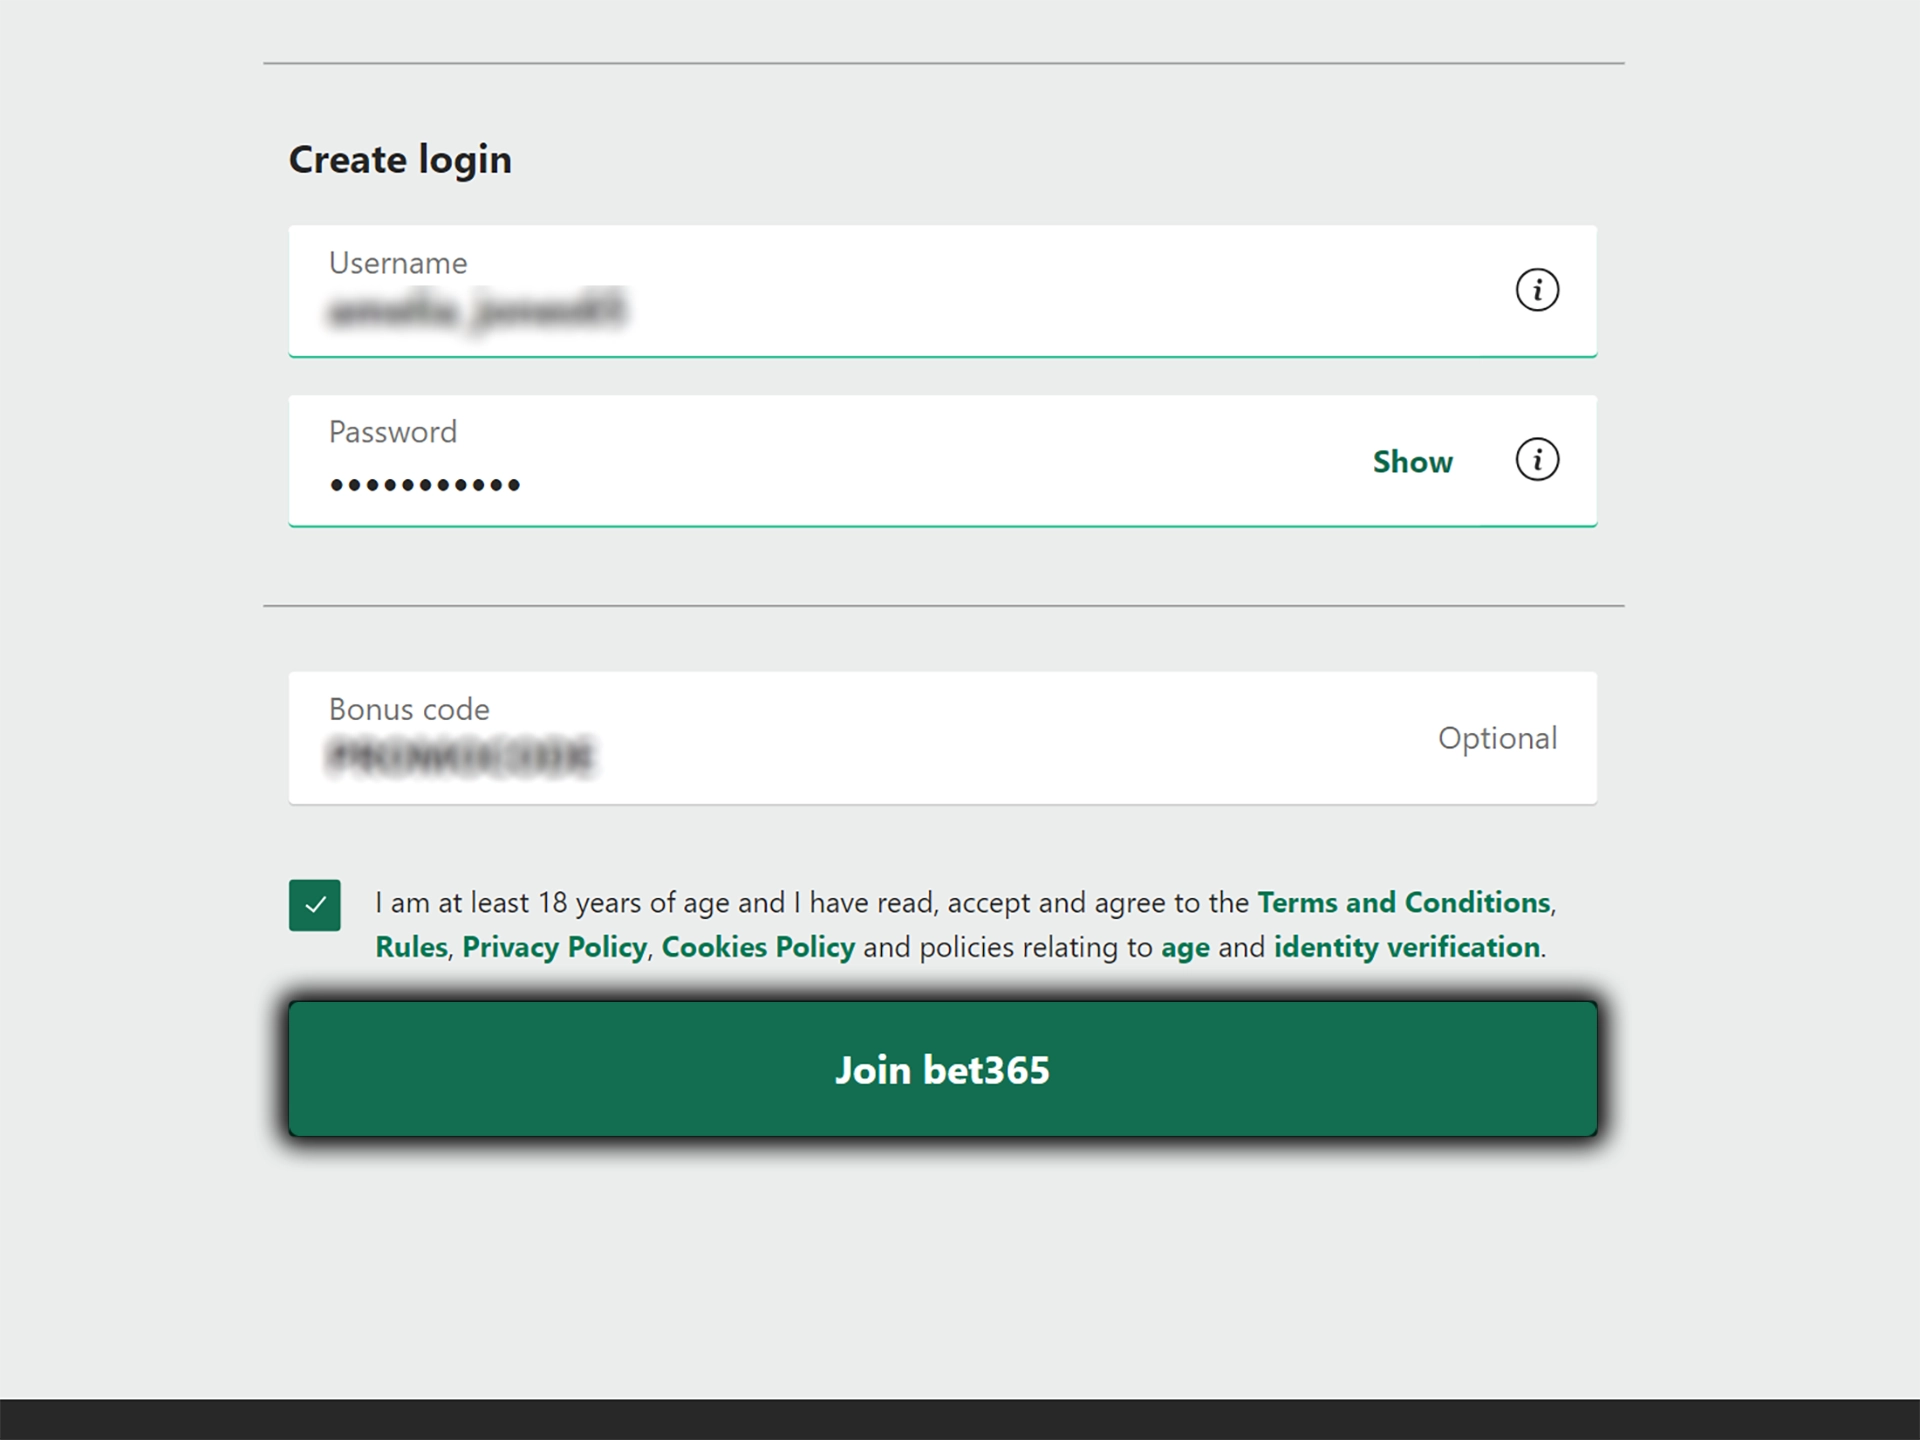 Come up with your login details and confirm the creation of your Bet365 account.